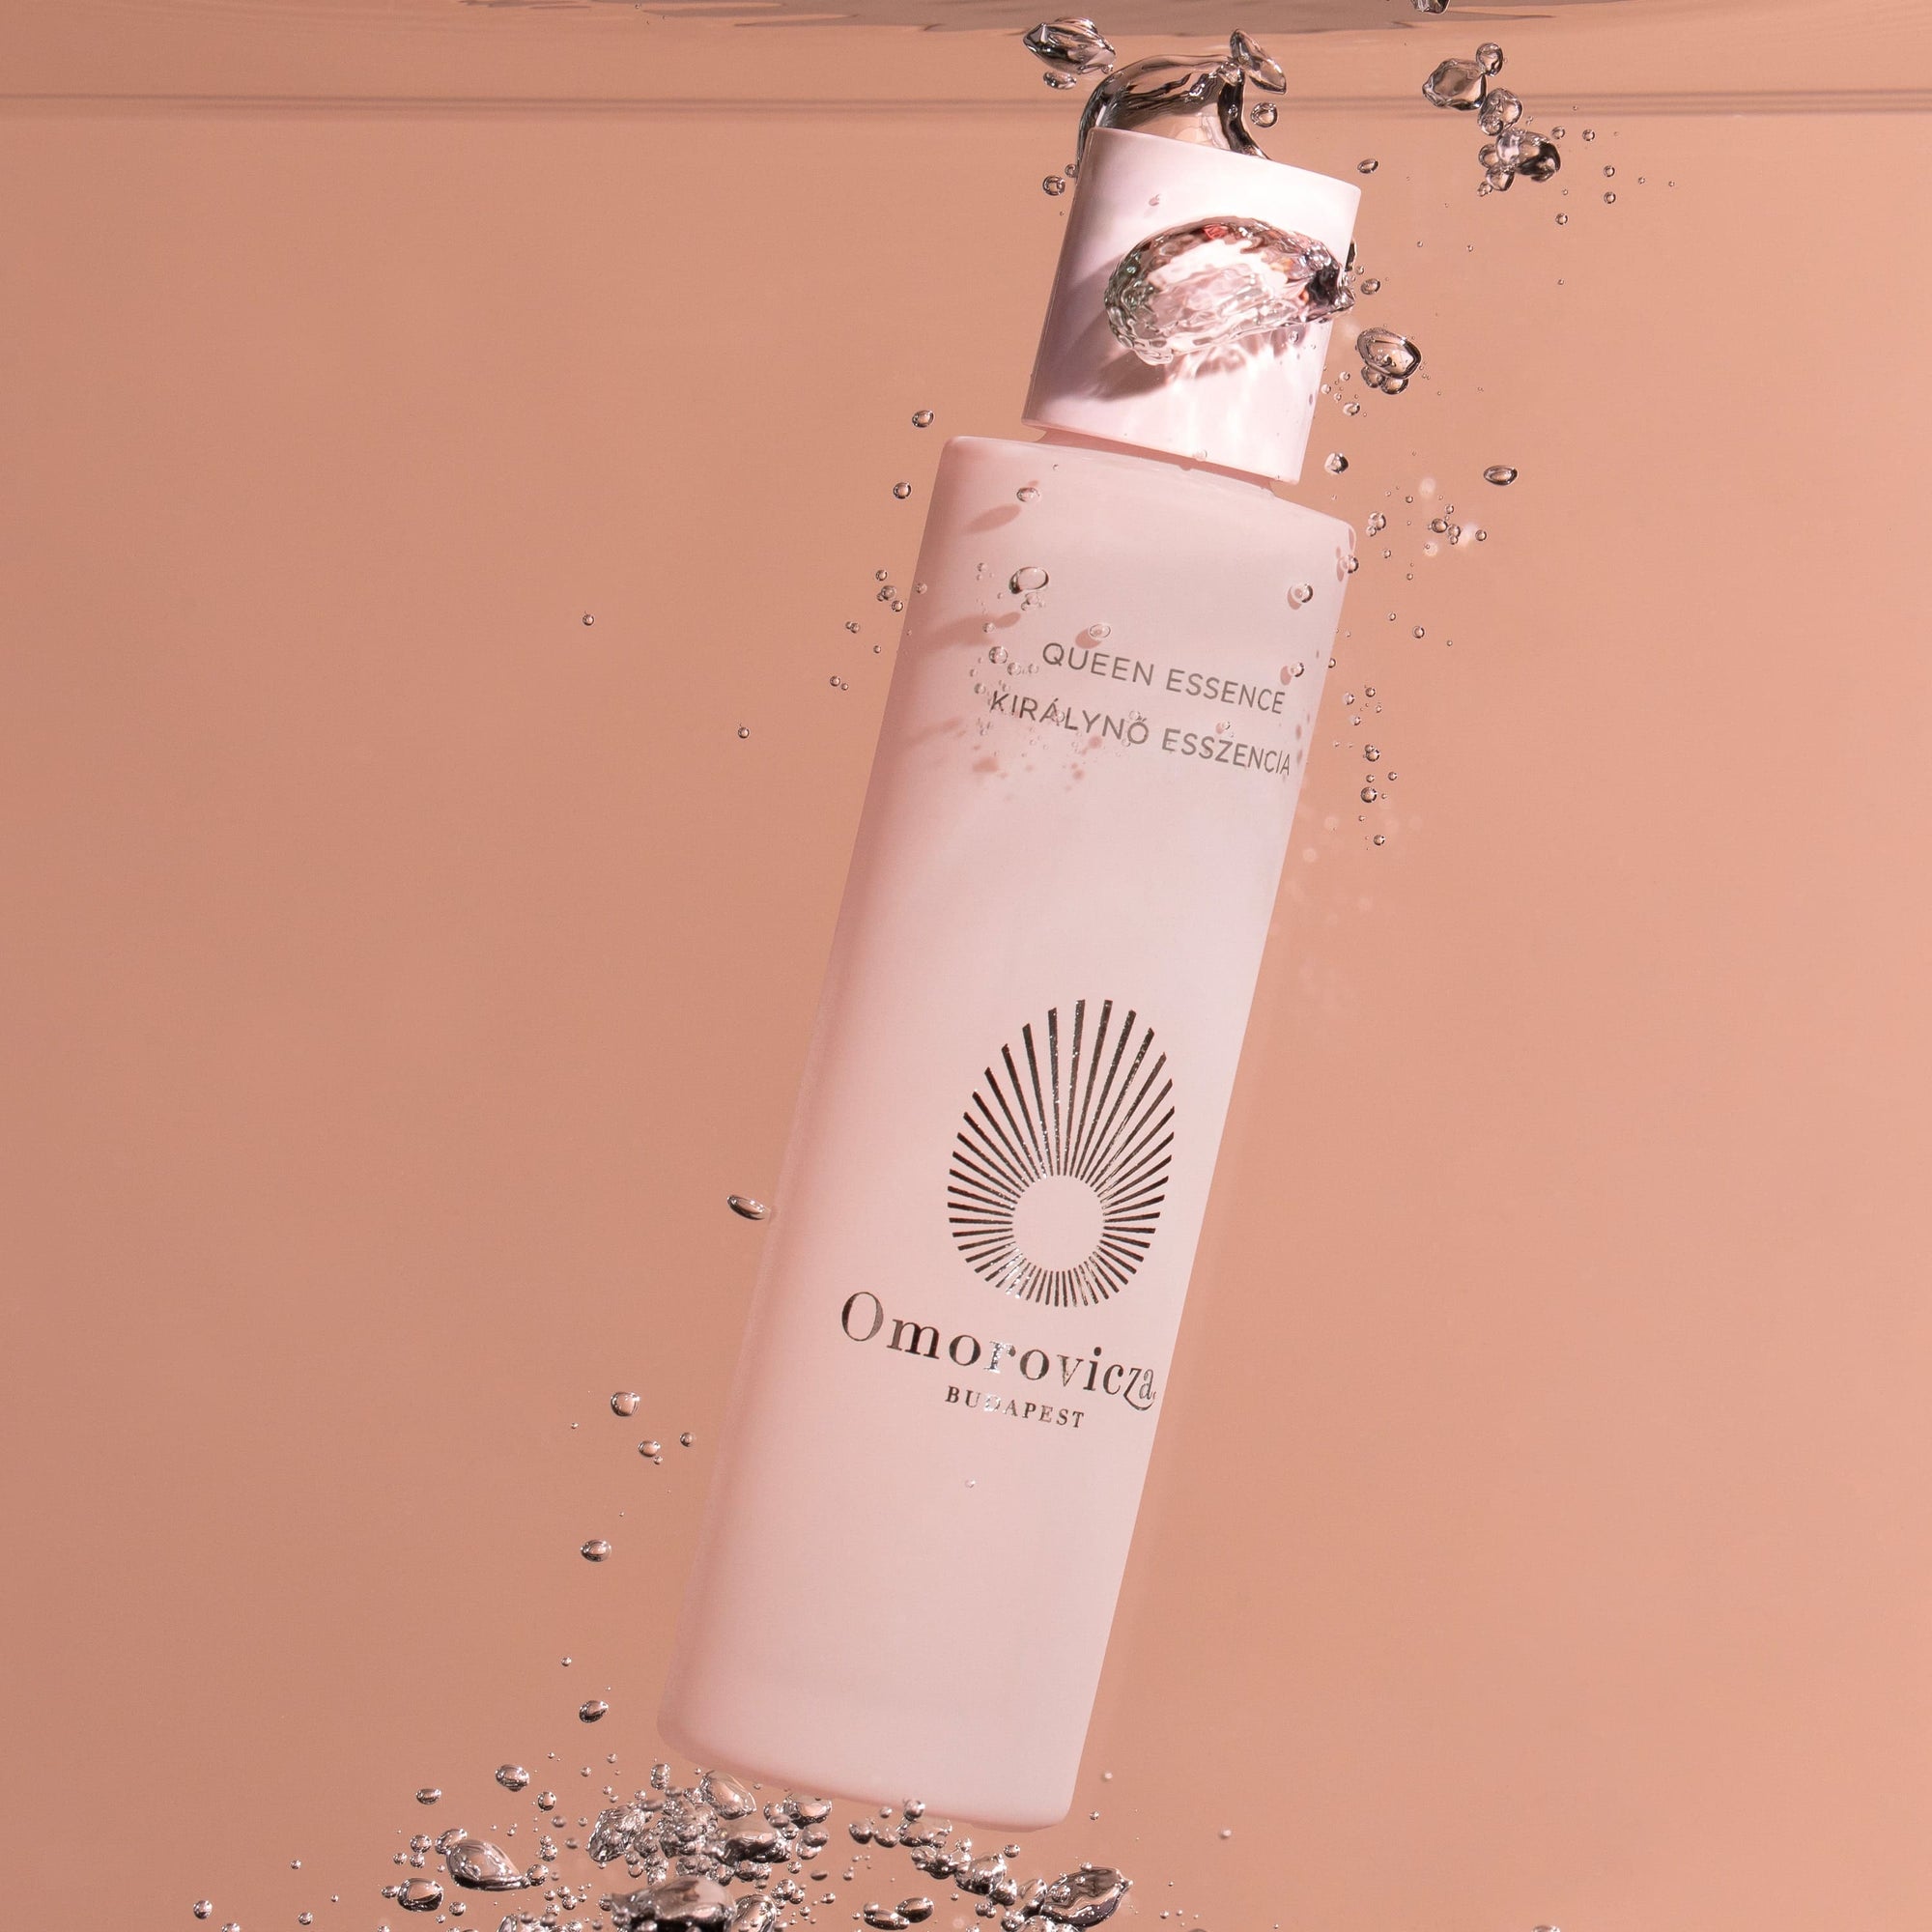 A tall bottle of the Queen Essence on the pink background, Submerged into water. 